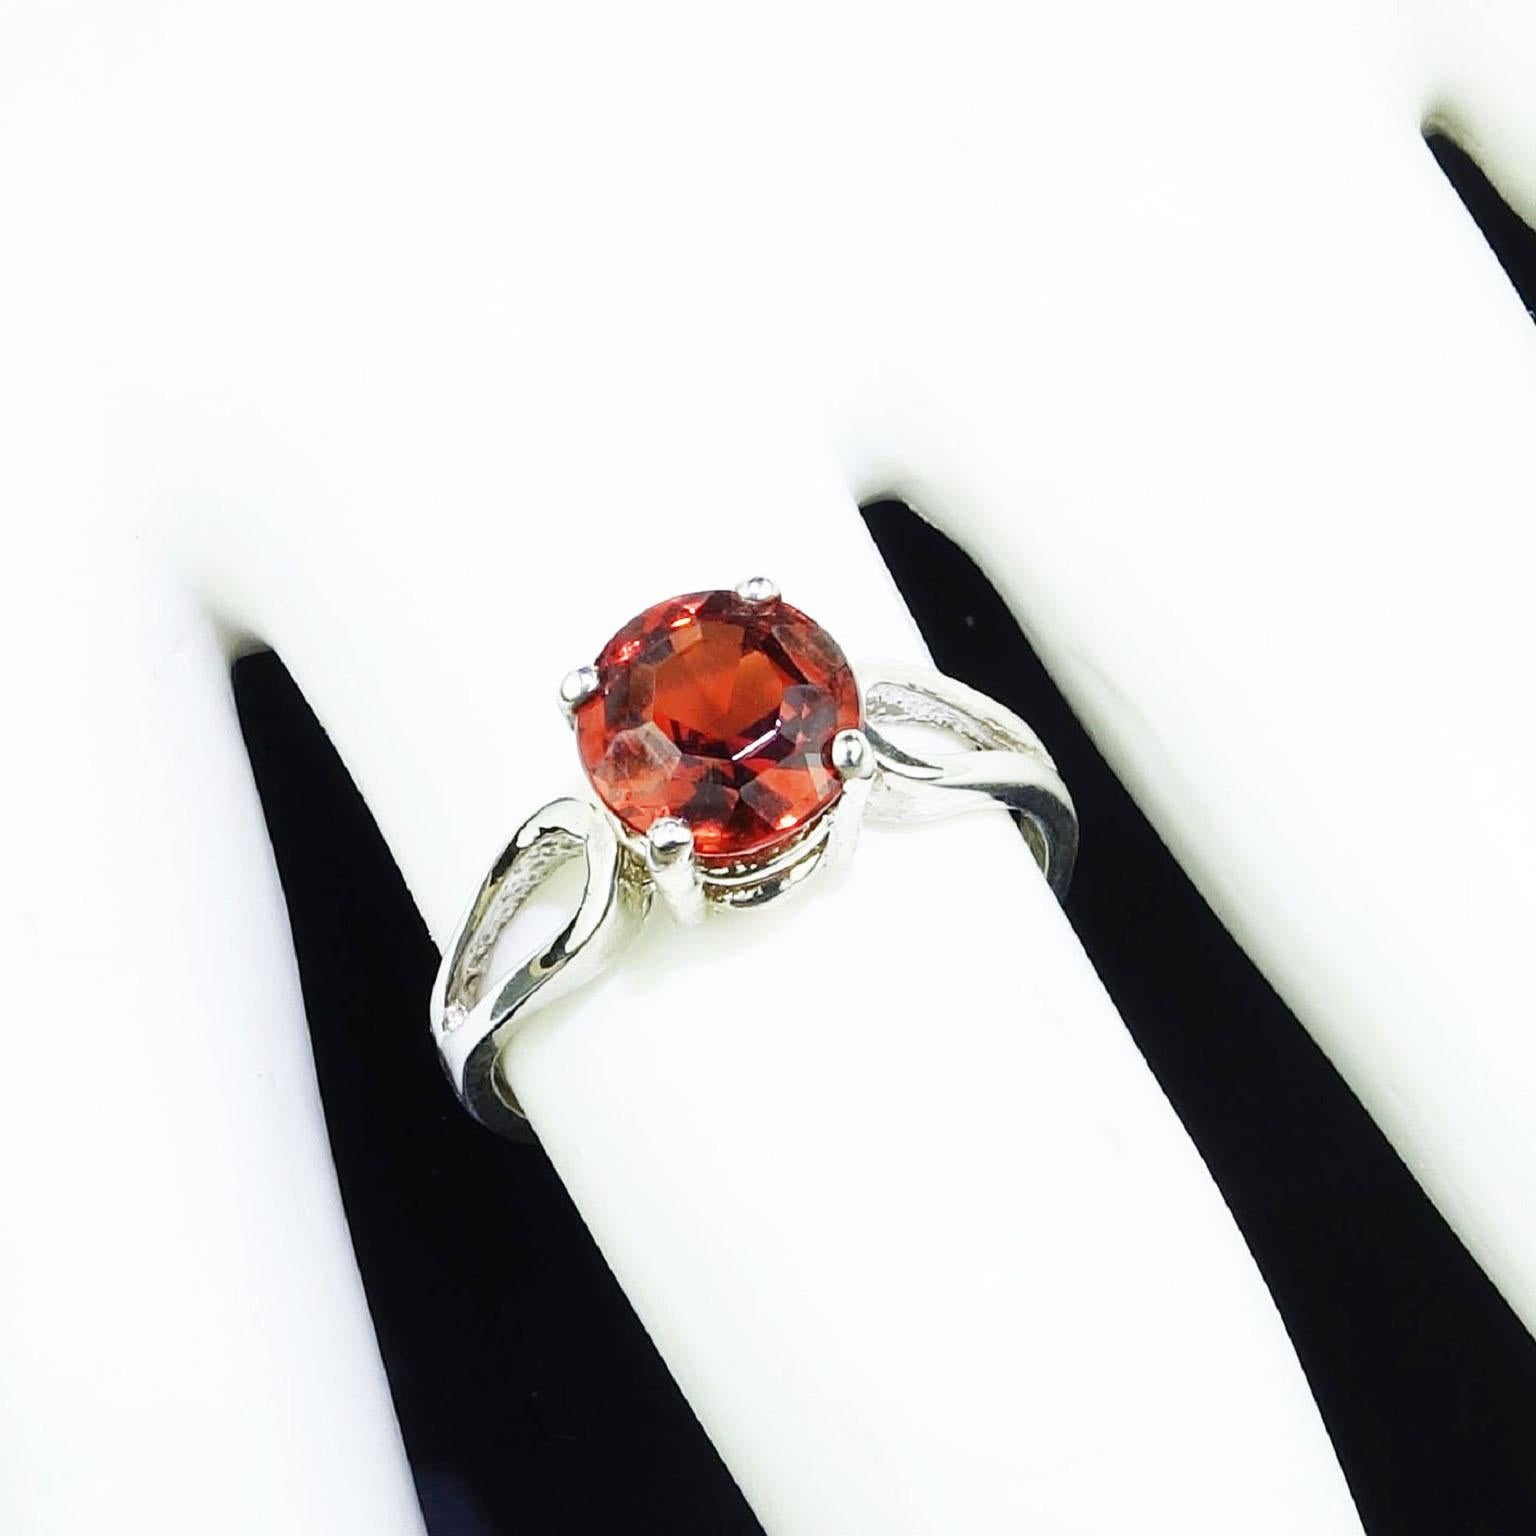 Custom made, Sterling Silver Ring with Round Spessartite Garnet of 2.16ct. Unique, sparkling orangy brown typical  Spessartite. The Sterling Silver setting is an elongated tear drop on either side of the basket holding the garnet. Size 7. No changes